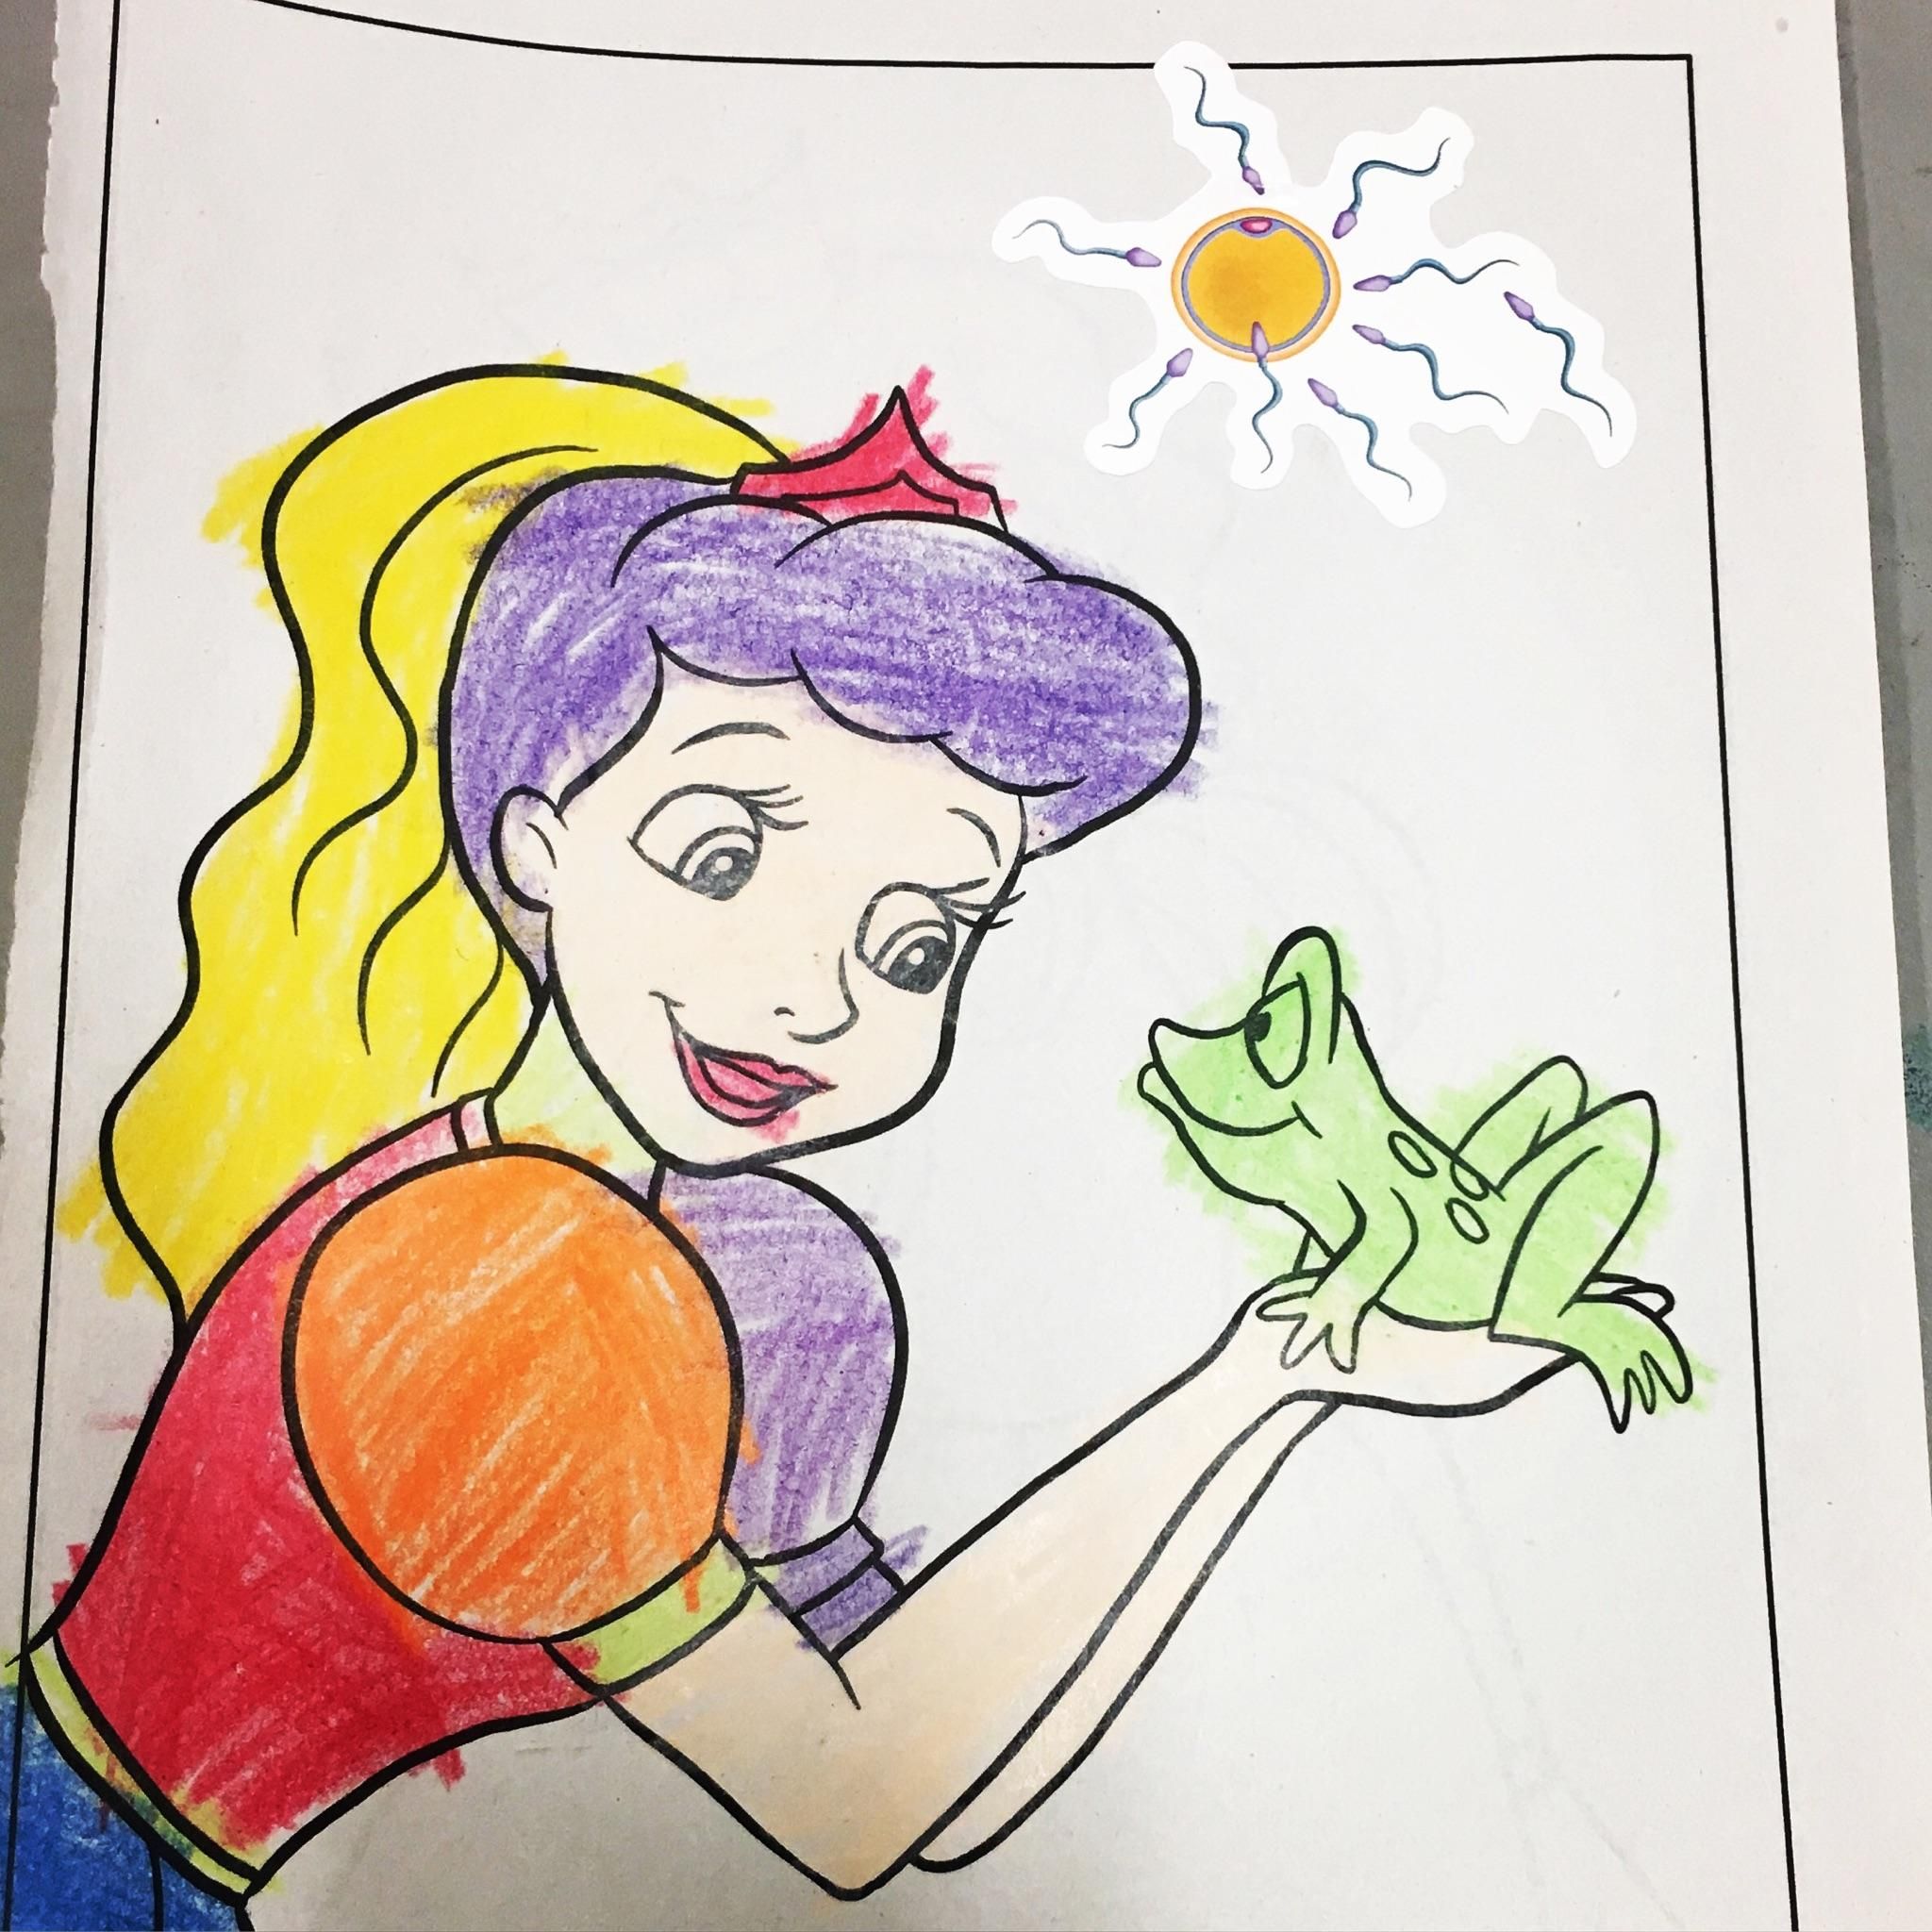 One of my GF's kindergarten students added a sticker they found to their coloring book yesterday.